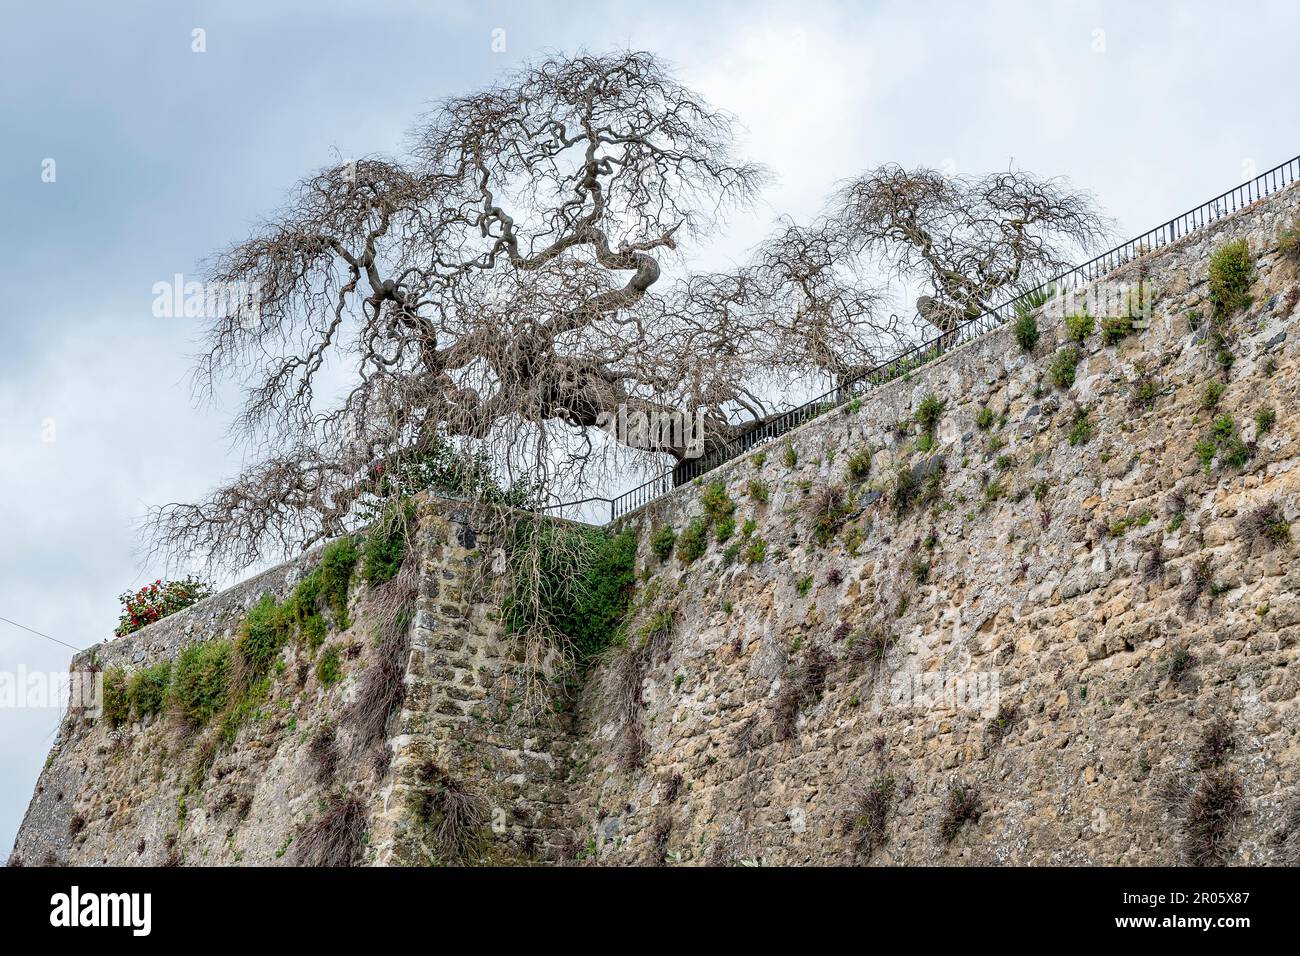 An old tree with many dry branches has a dangerously inclined trunk on the top of the Farnese fortress of Capodimonte, Viterbo, Italy Stock Photo